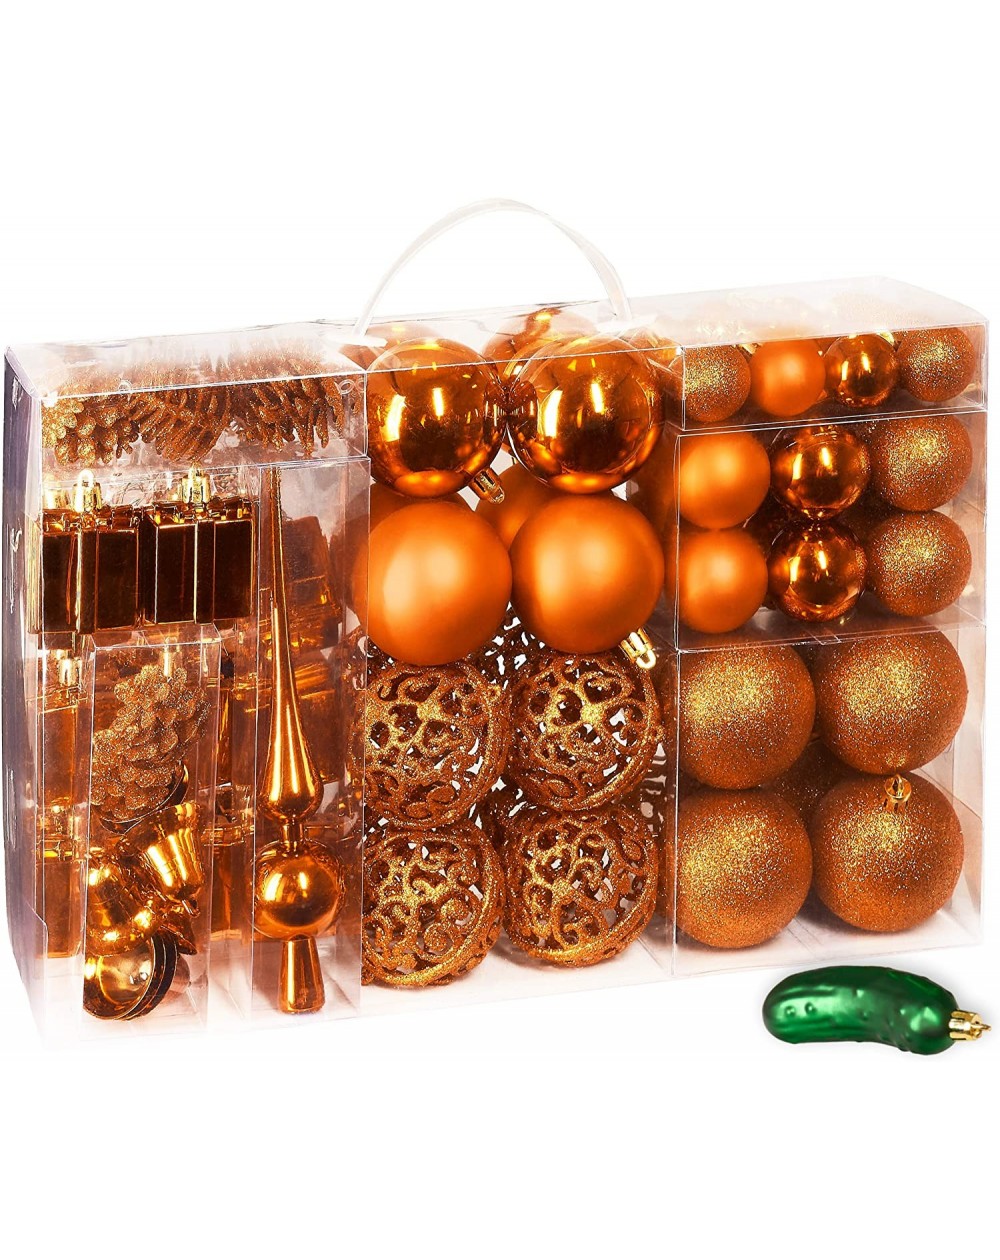 Ornaments 101 Pack Assorted Christmas Ball Ornaments - Shatterproof - with Green Pickle and Tree Topper - Designed in Germany...